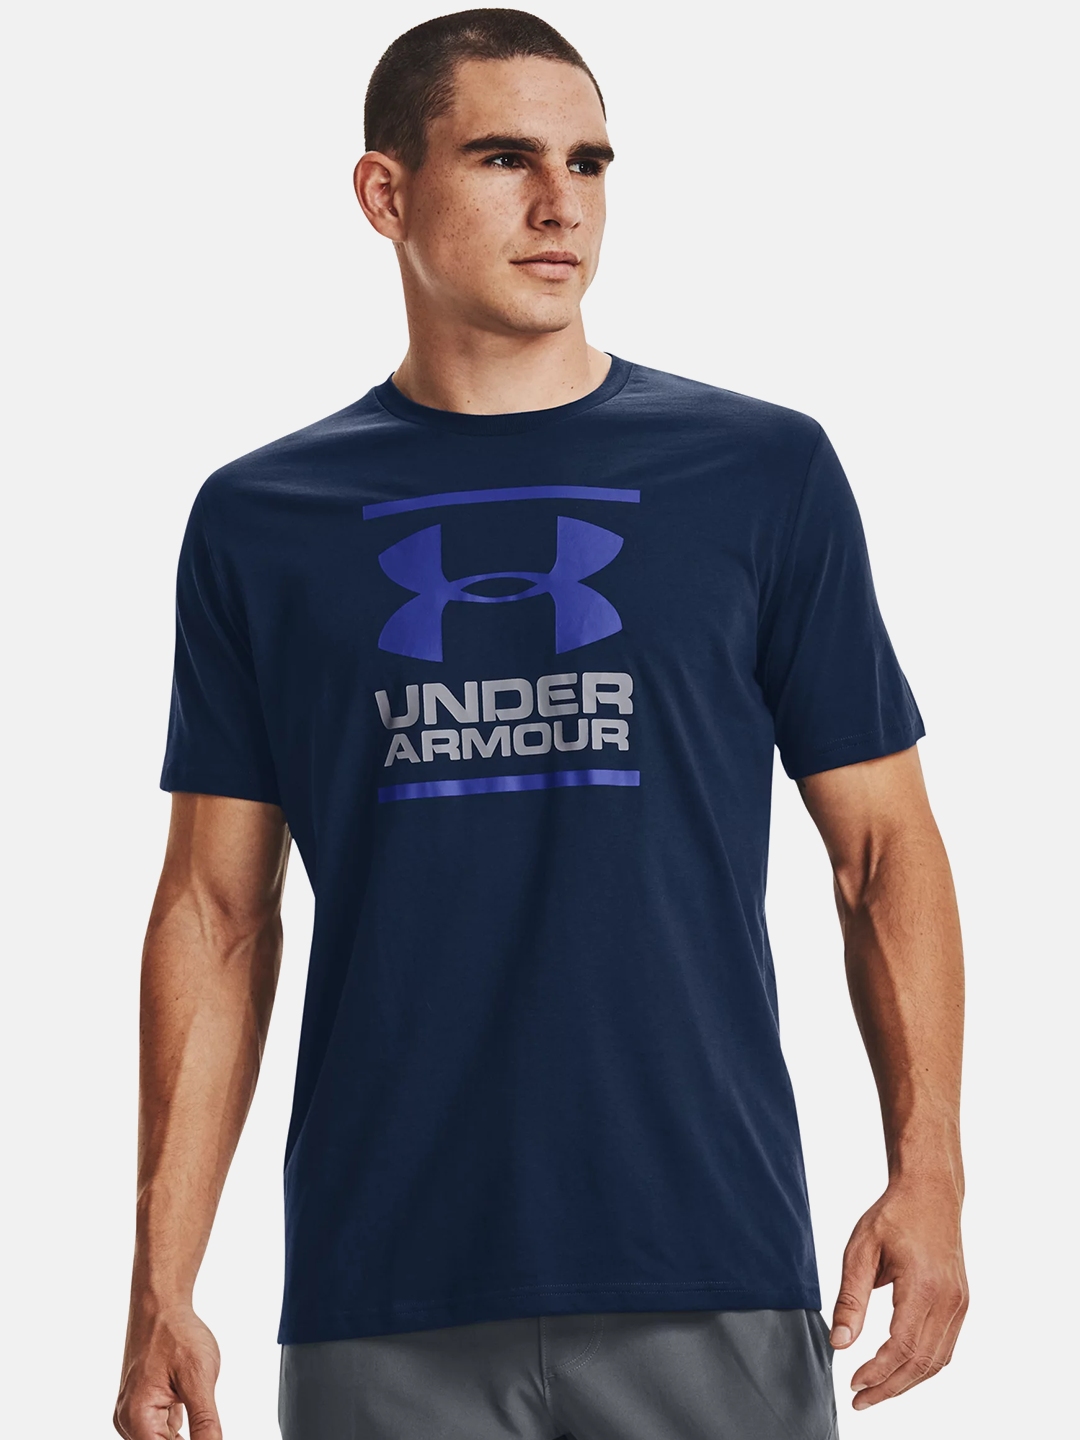 Under Armour® Boys Freedom BFL T-Shirt-Steel/White